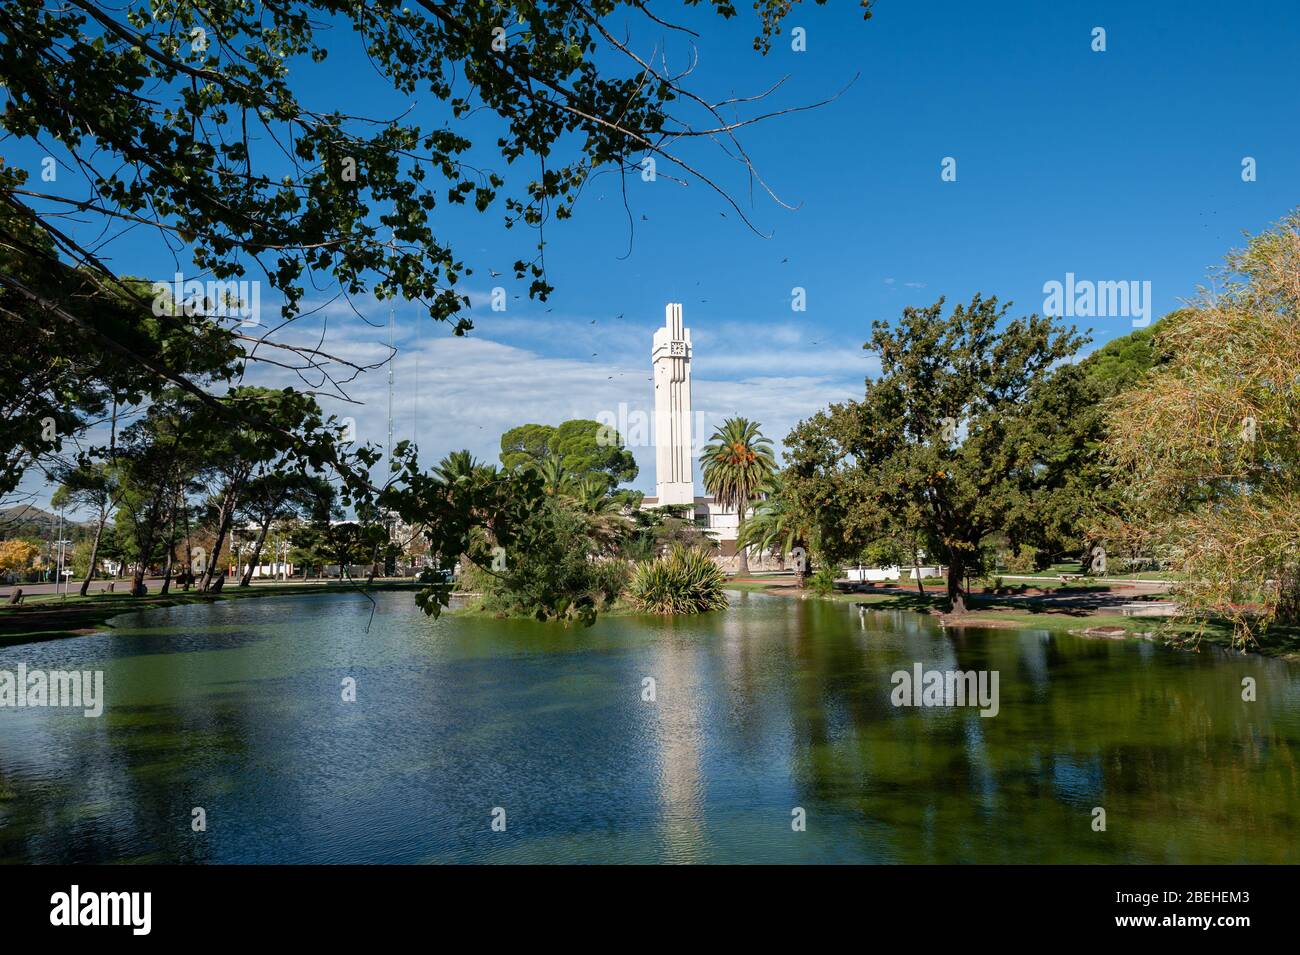 Square and City Hall of Tornquist, a town in Buenos Aires Province, Argentina. Stock Photo